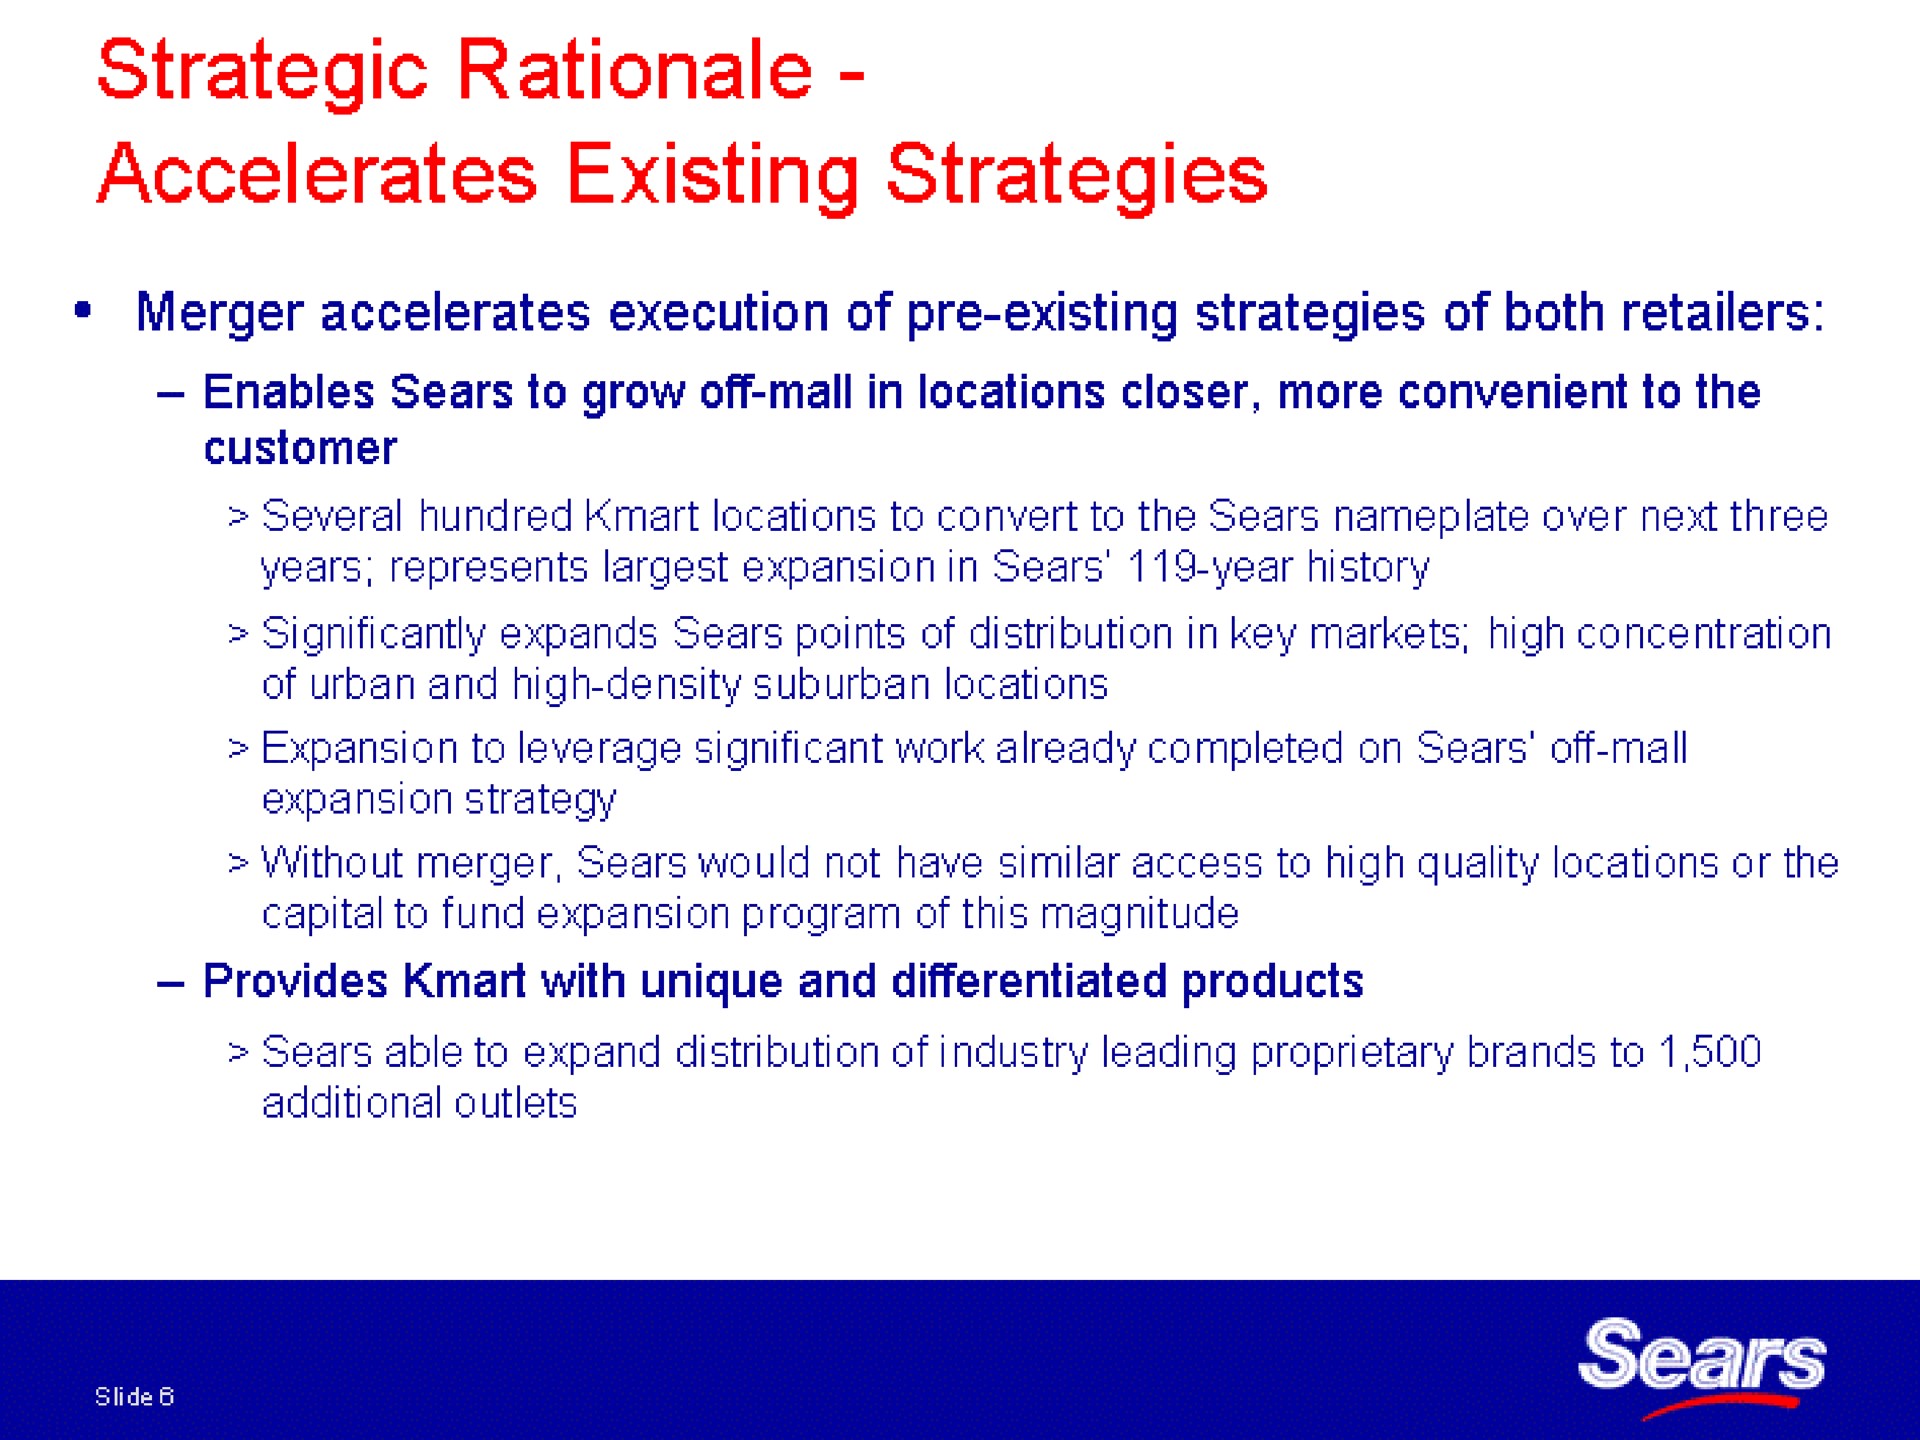 strategic rationale accelerates existing strategies | Sears